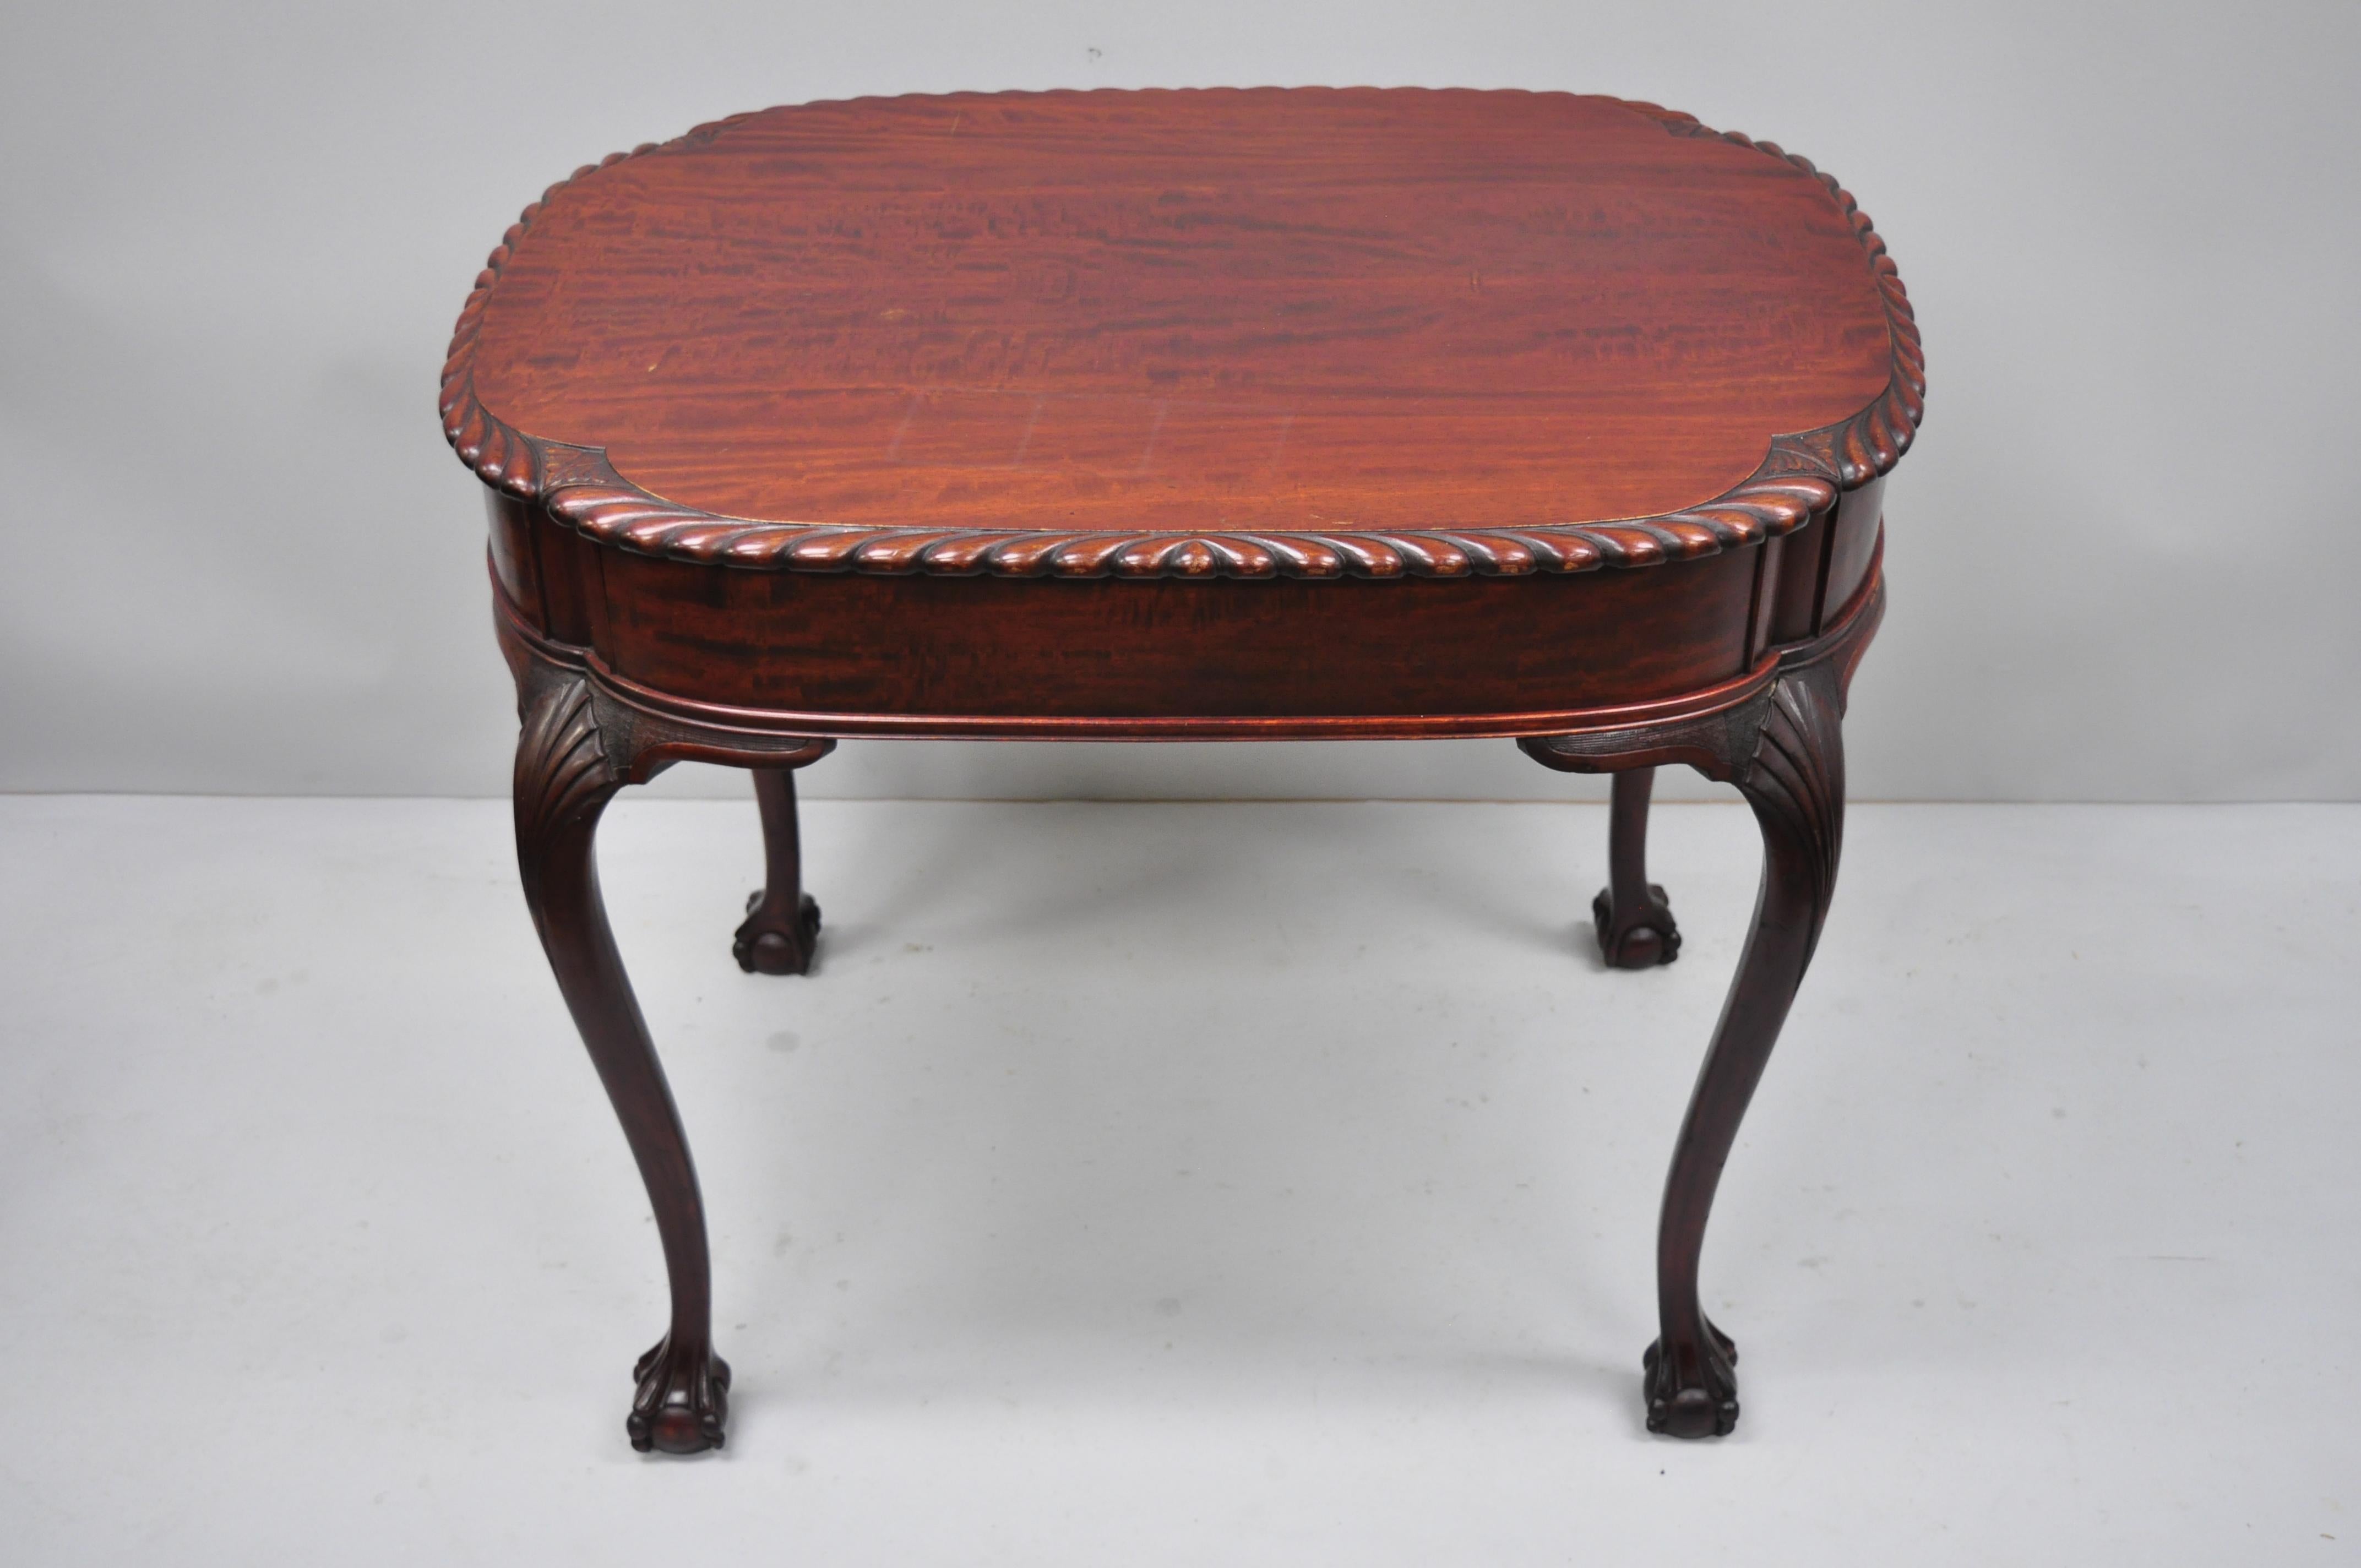 Antique Chippendale style rope carved mahogany ball and claw parlor side table. Item features shell carved knees, rope carved border, cabriole legs, shaped turtle top, solid wood construction, beautiful wood grain, and finely carved details; Very